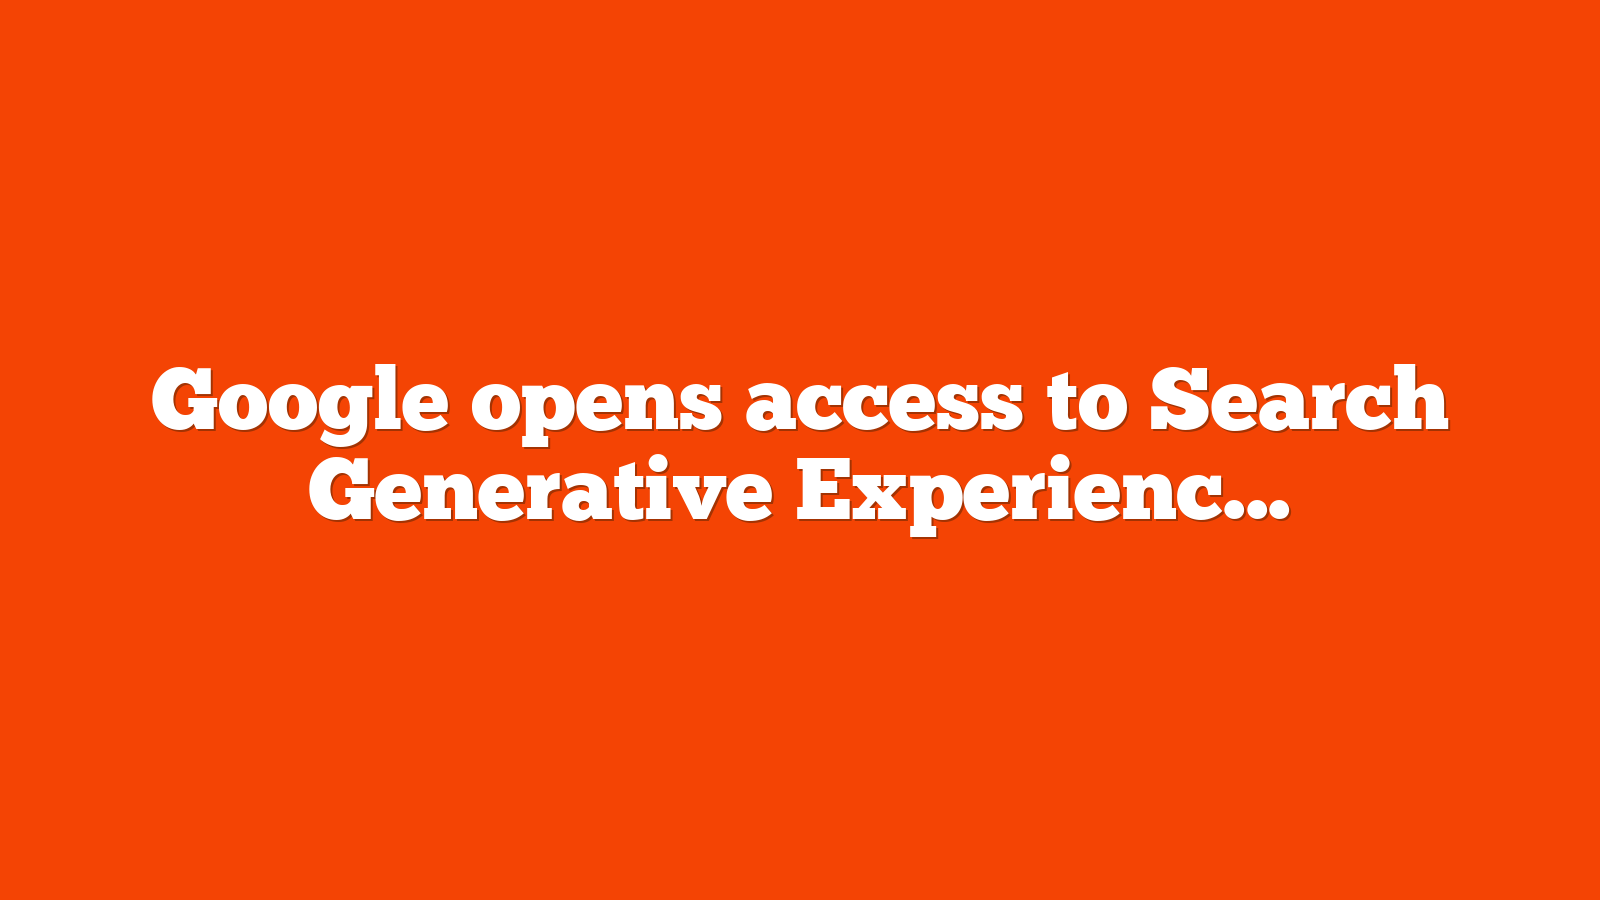 Google opens access to Search Generative Experience today